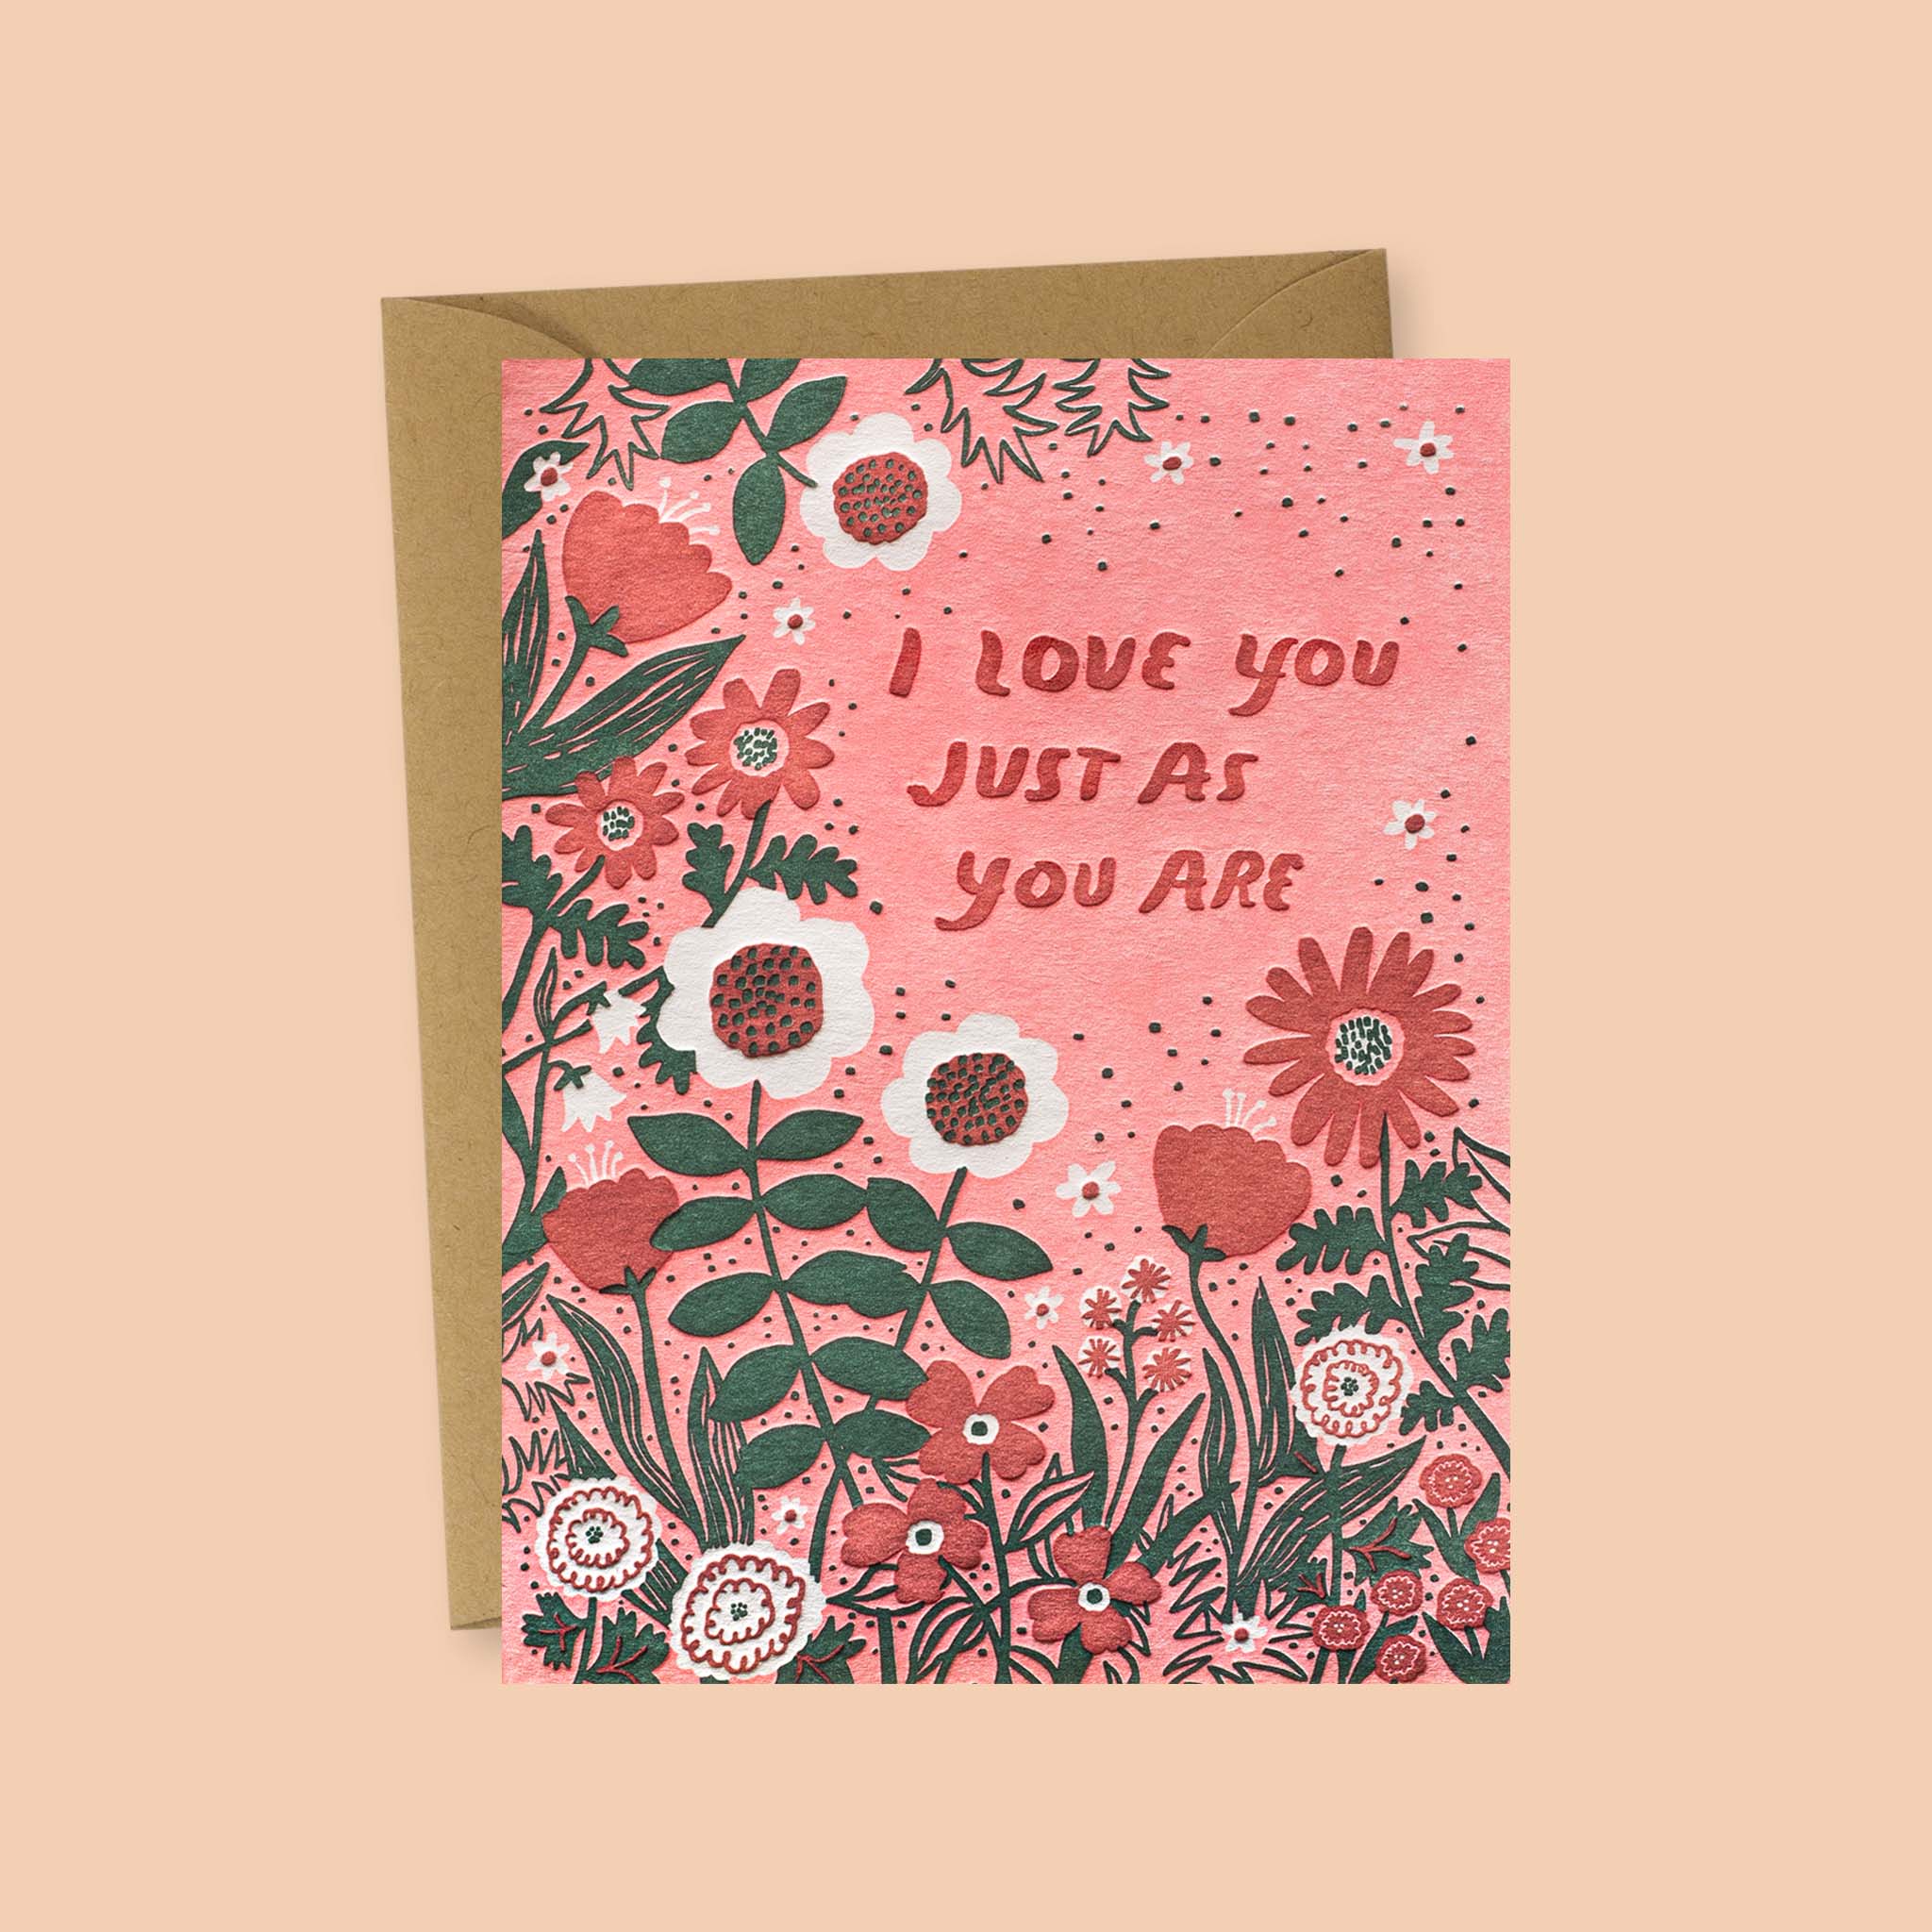 I love you just as you are greeting card - Phoebe Wahl